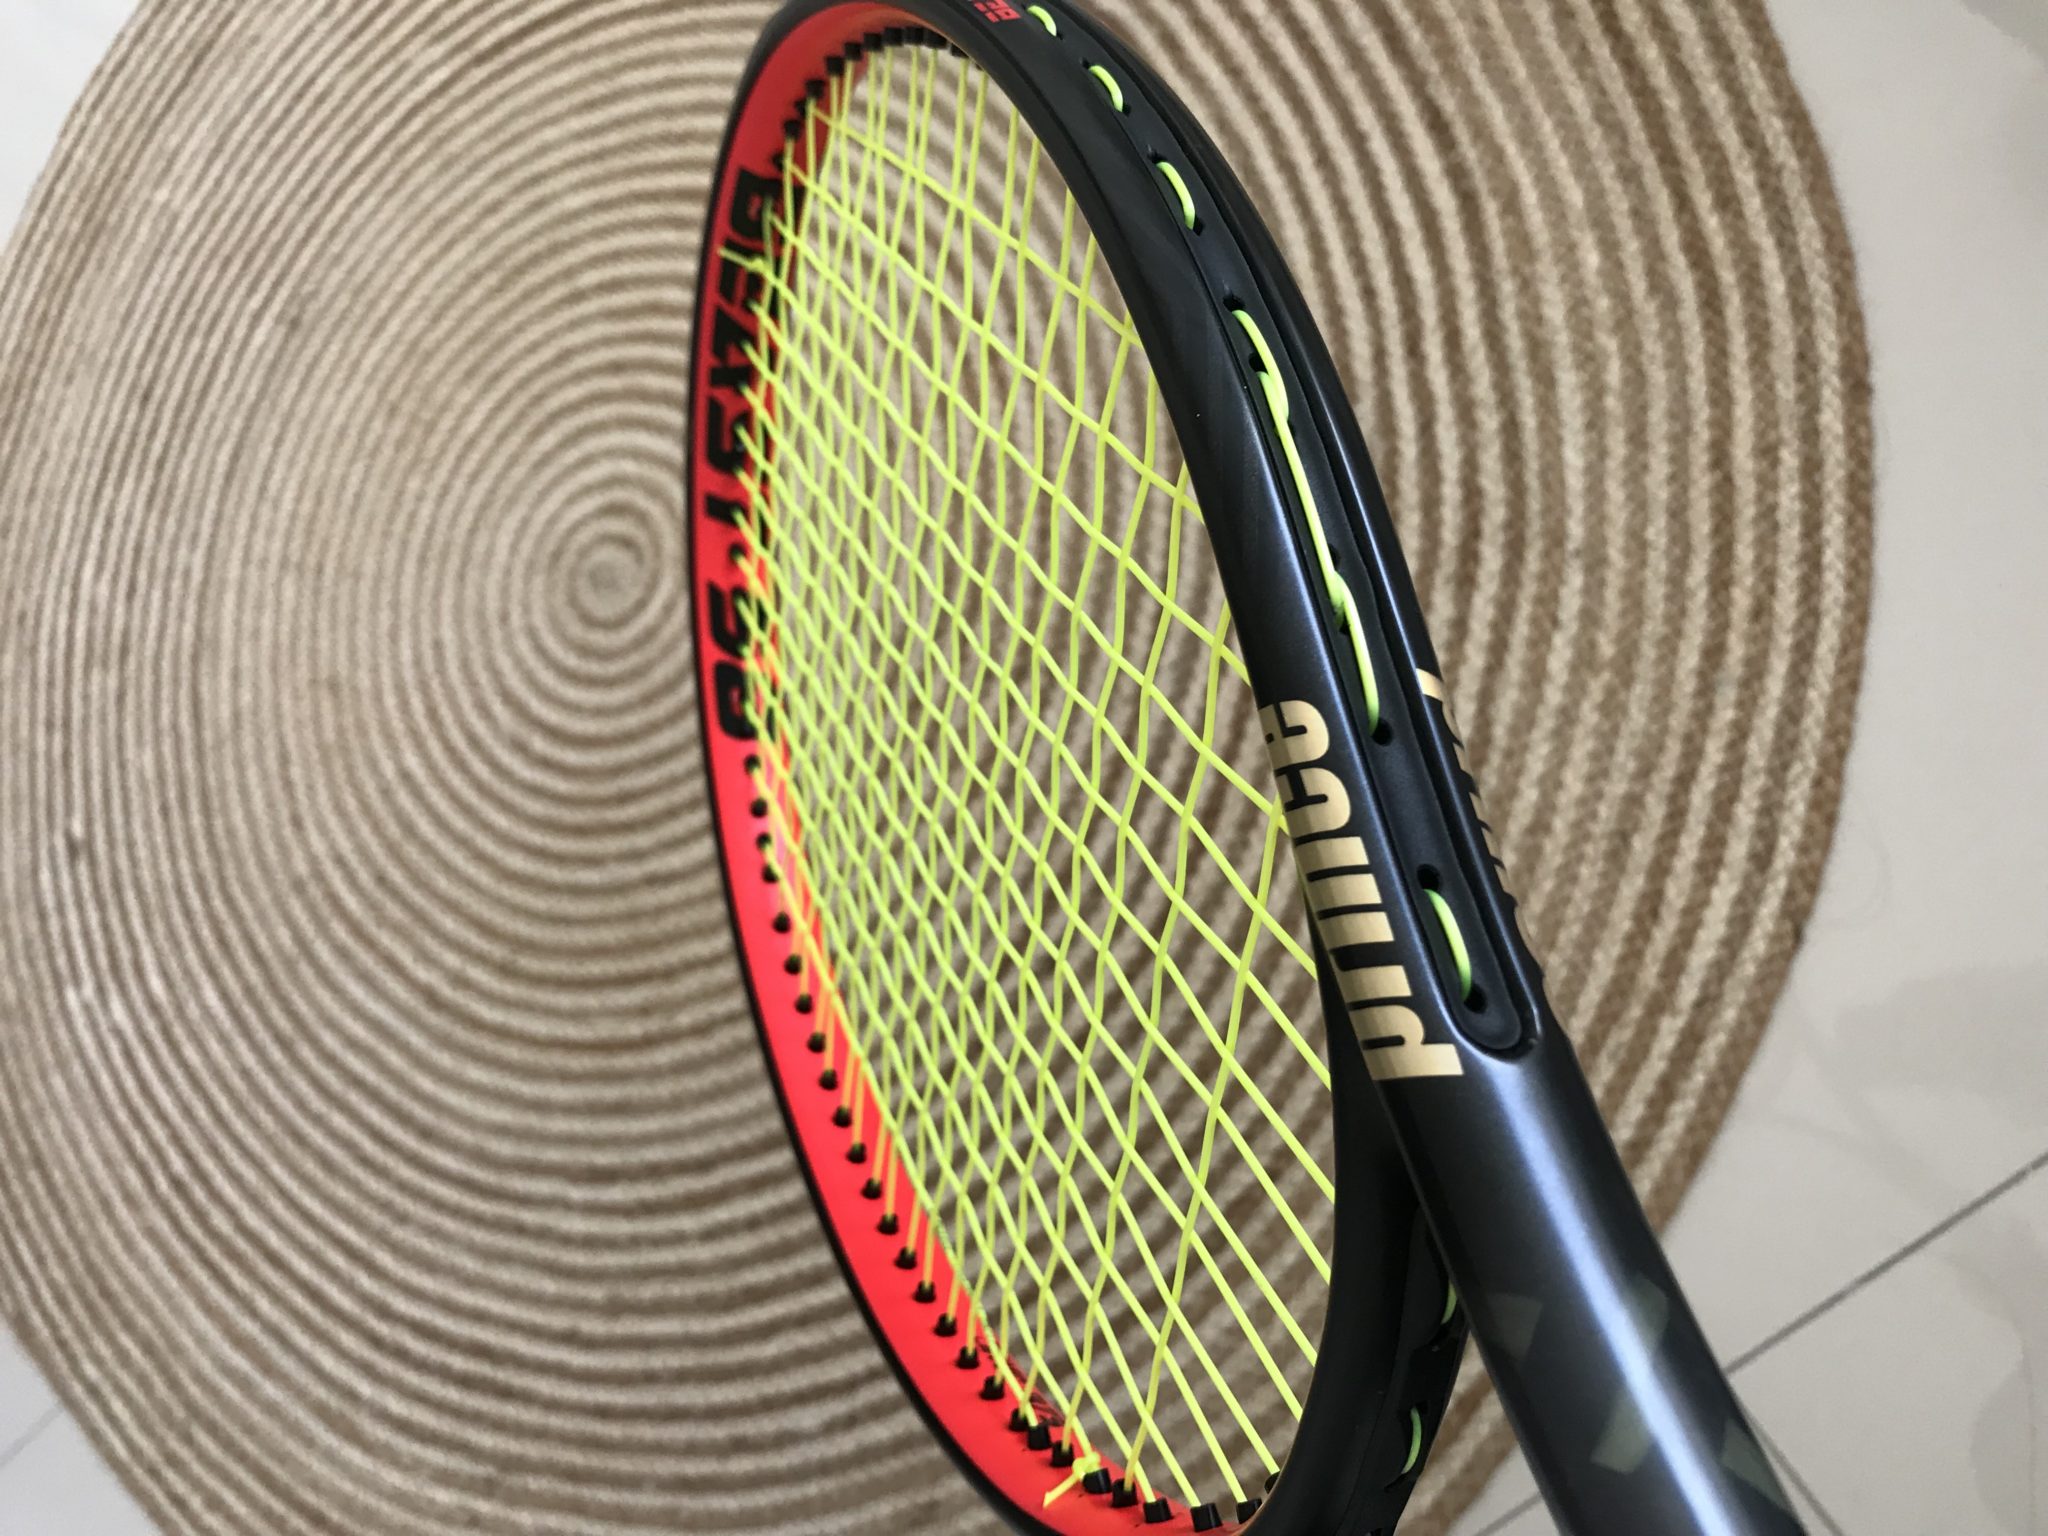 Prince Beast Racquets - New racquets from Prince